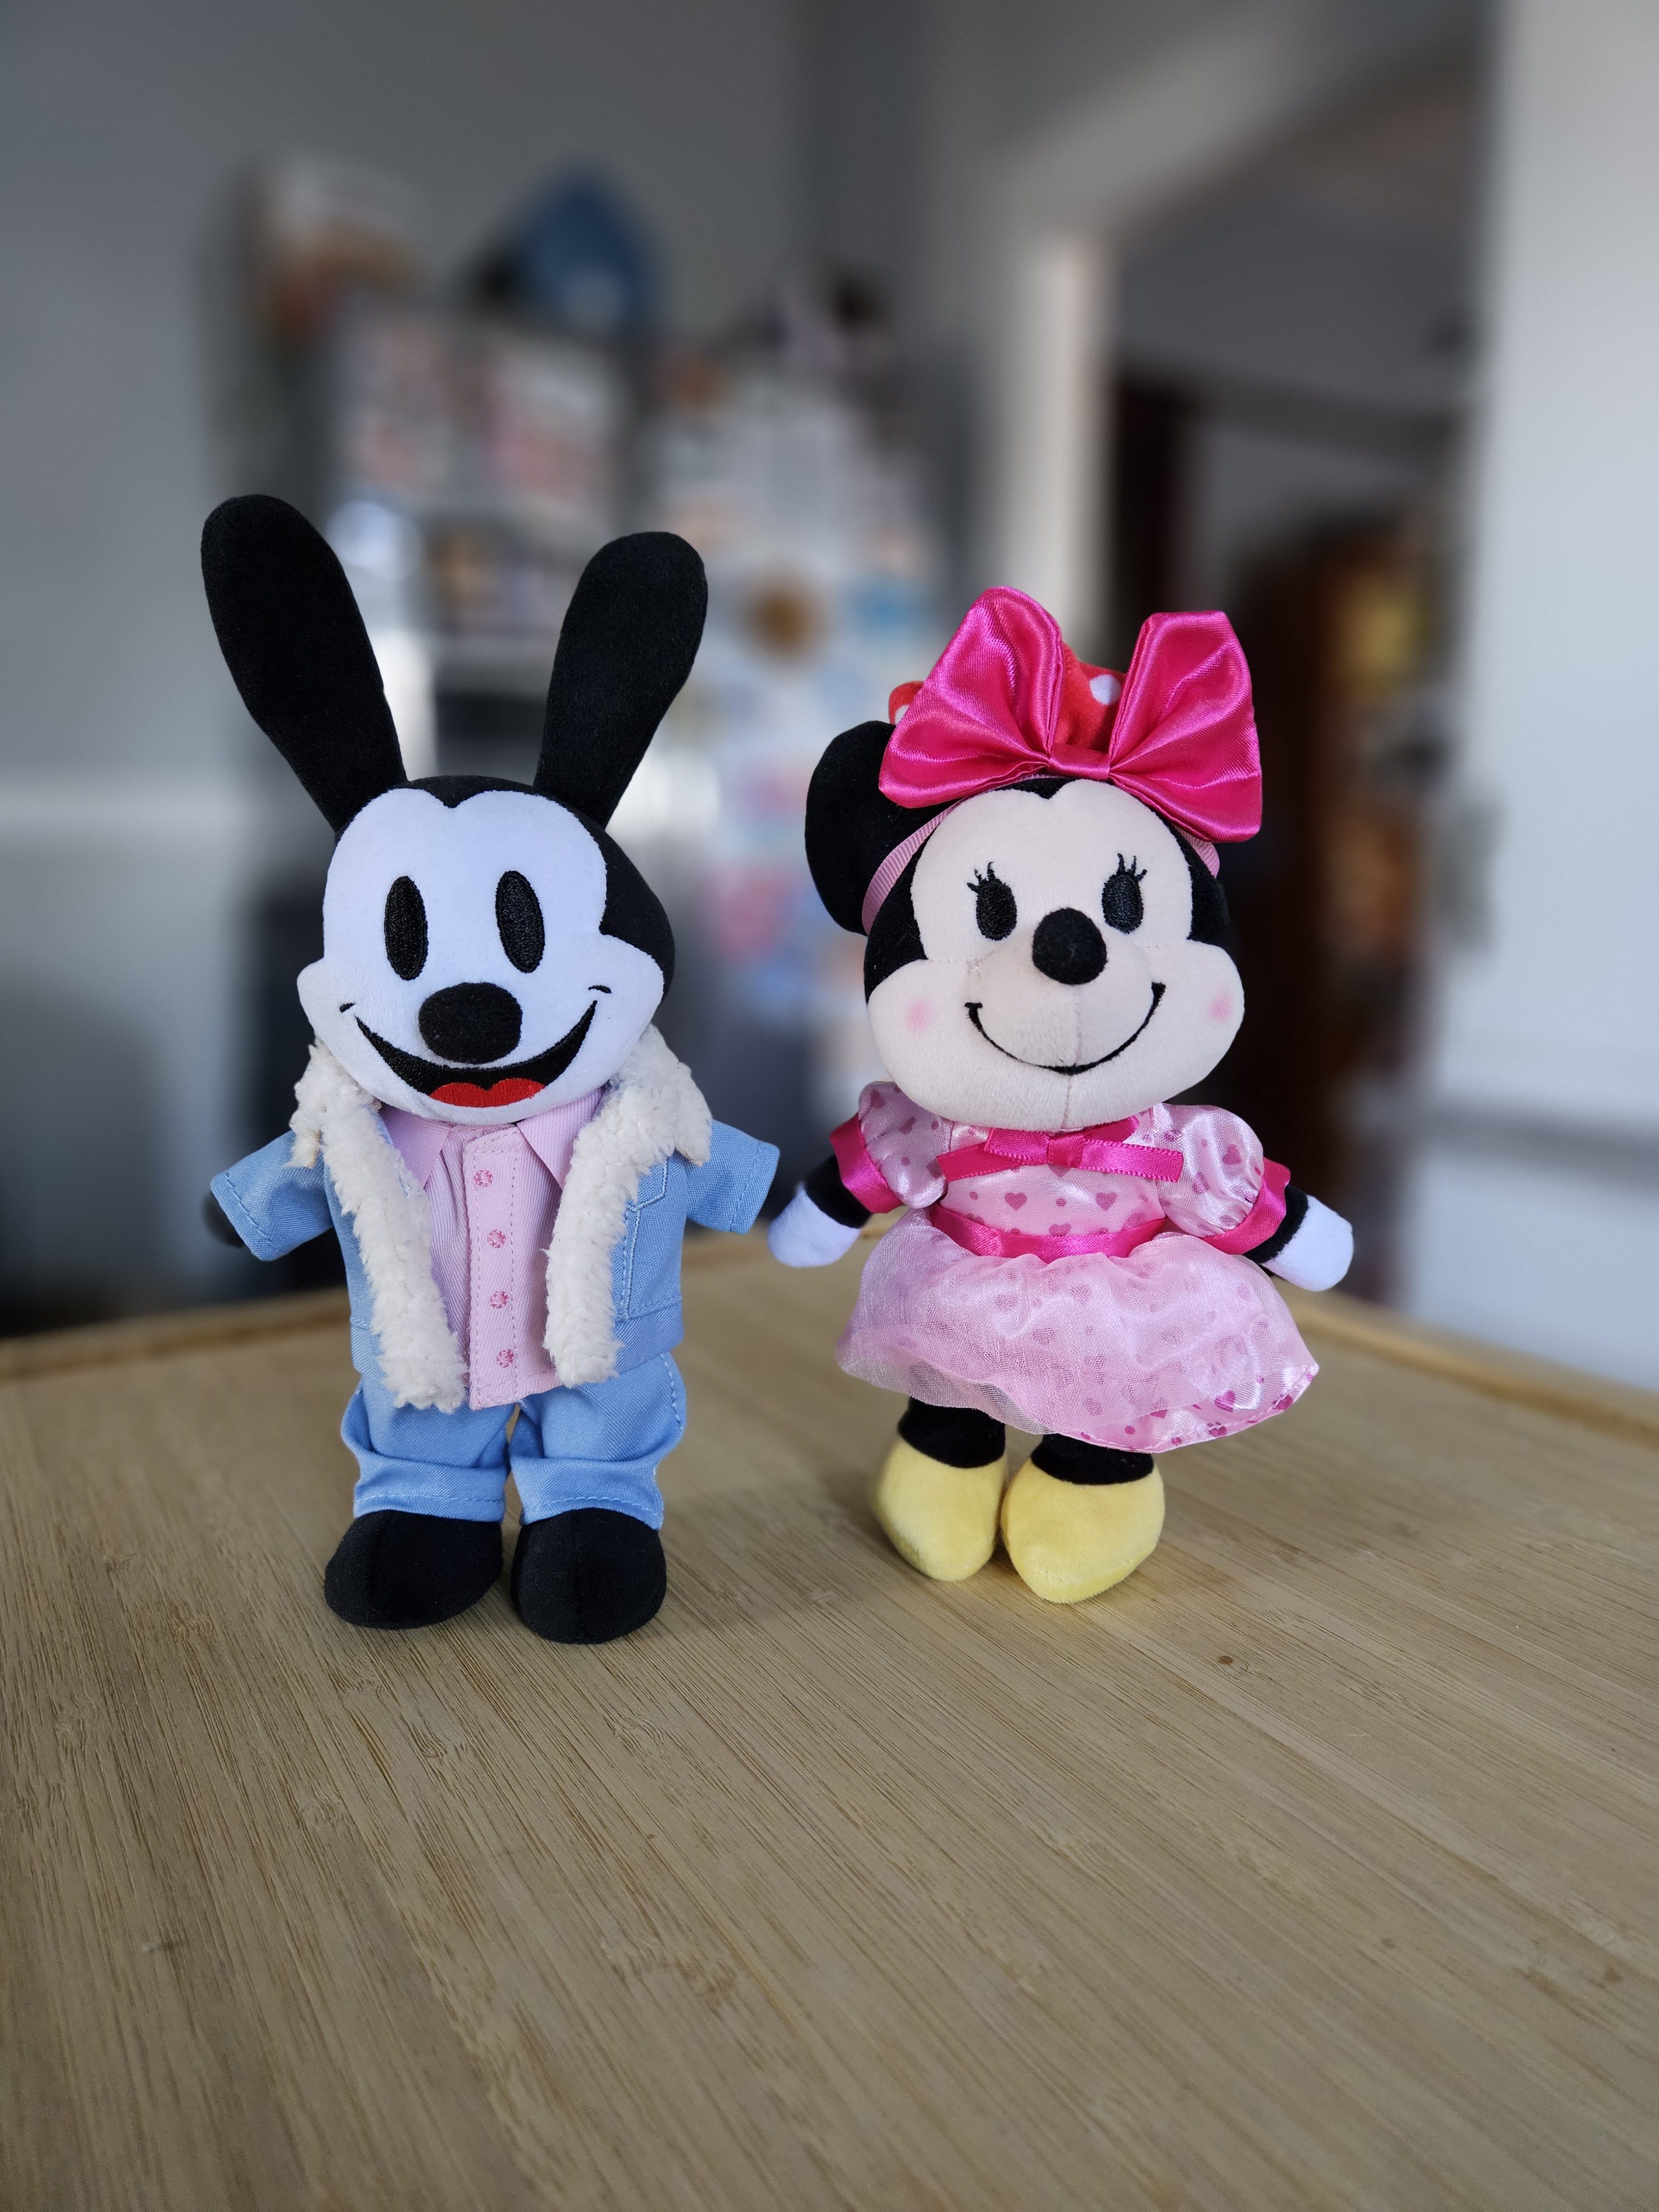 Oswald and Minnie nuiMOs portrait mode